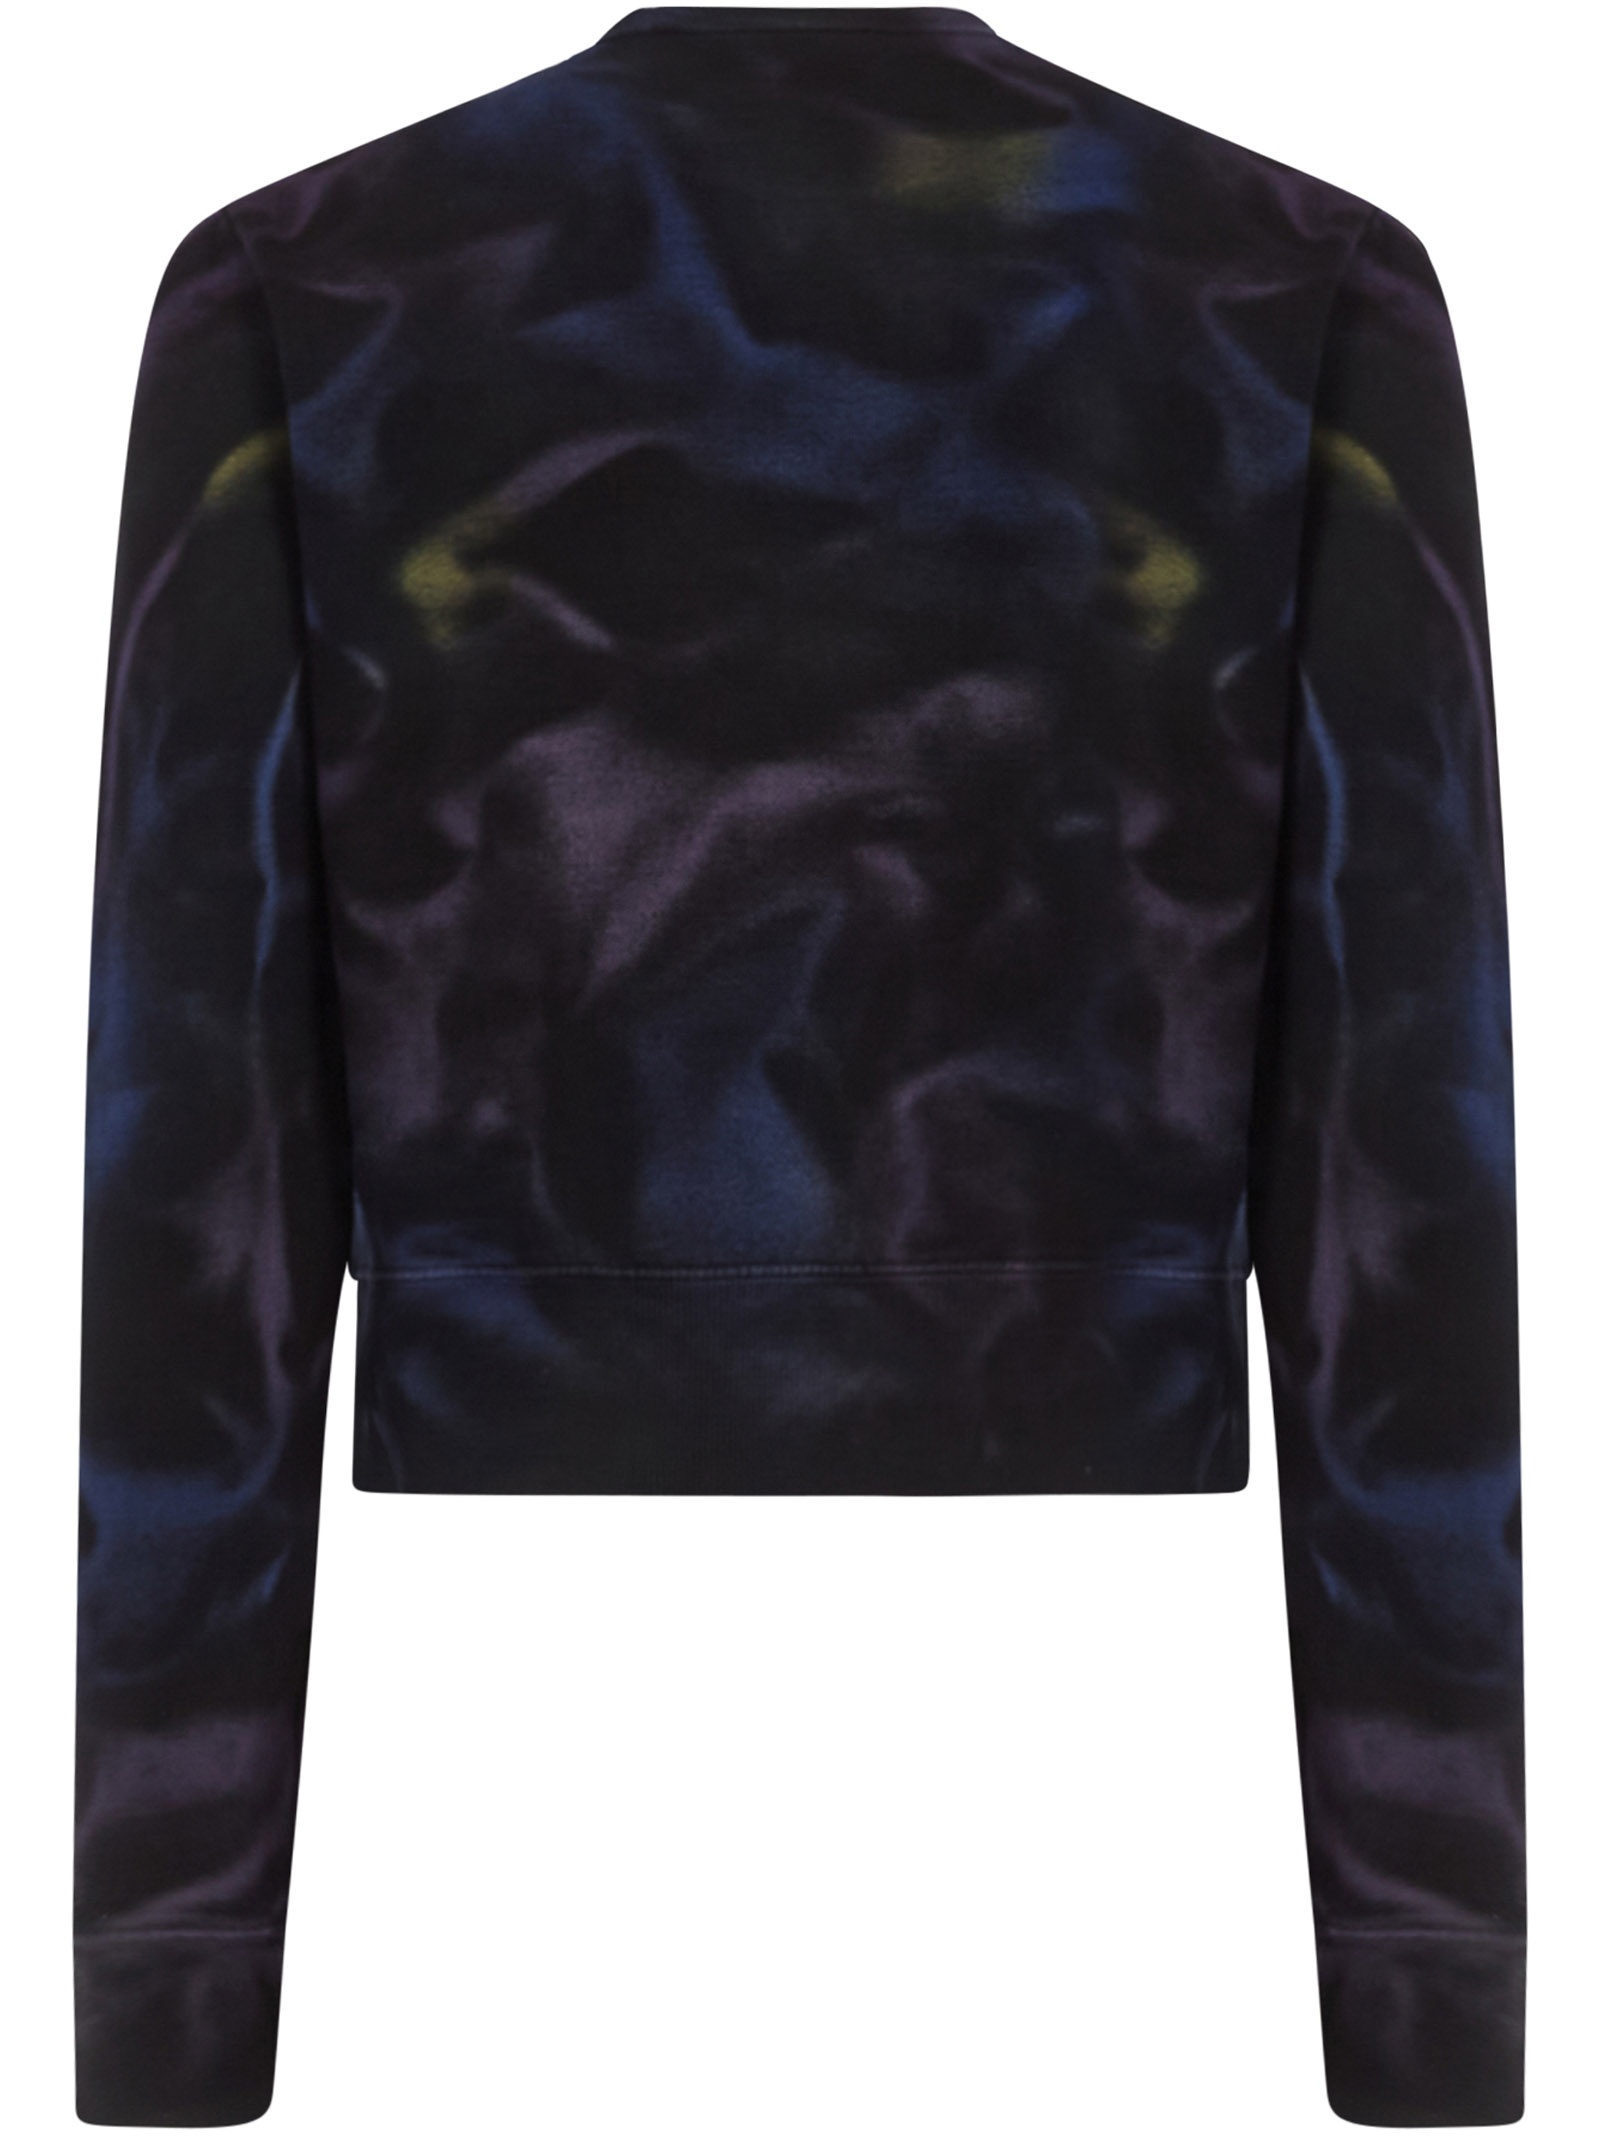 Black cotton short sweatshirt with all-over tie-dye pattern and front logo. - 2